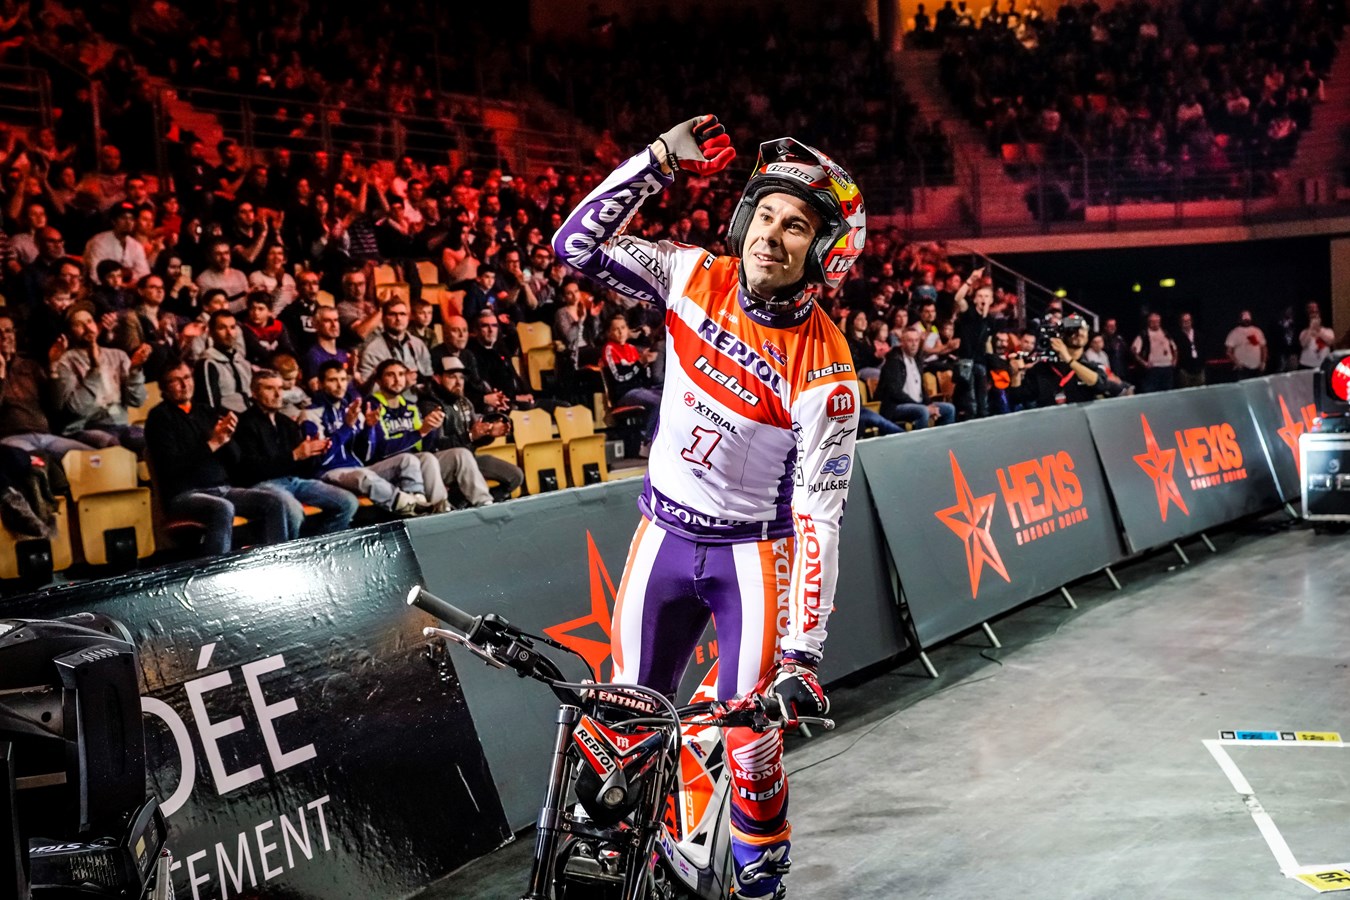 Another world title for Toni Bou